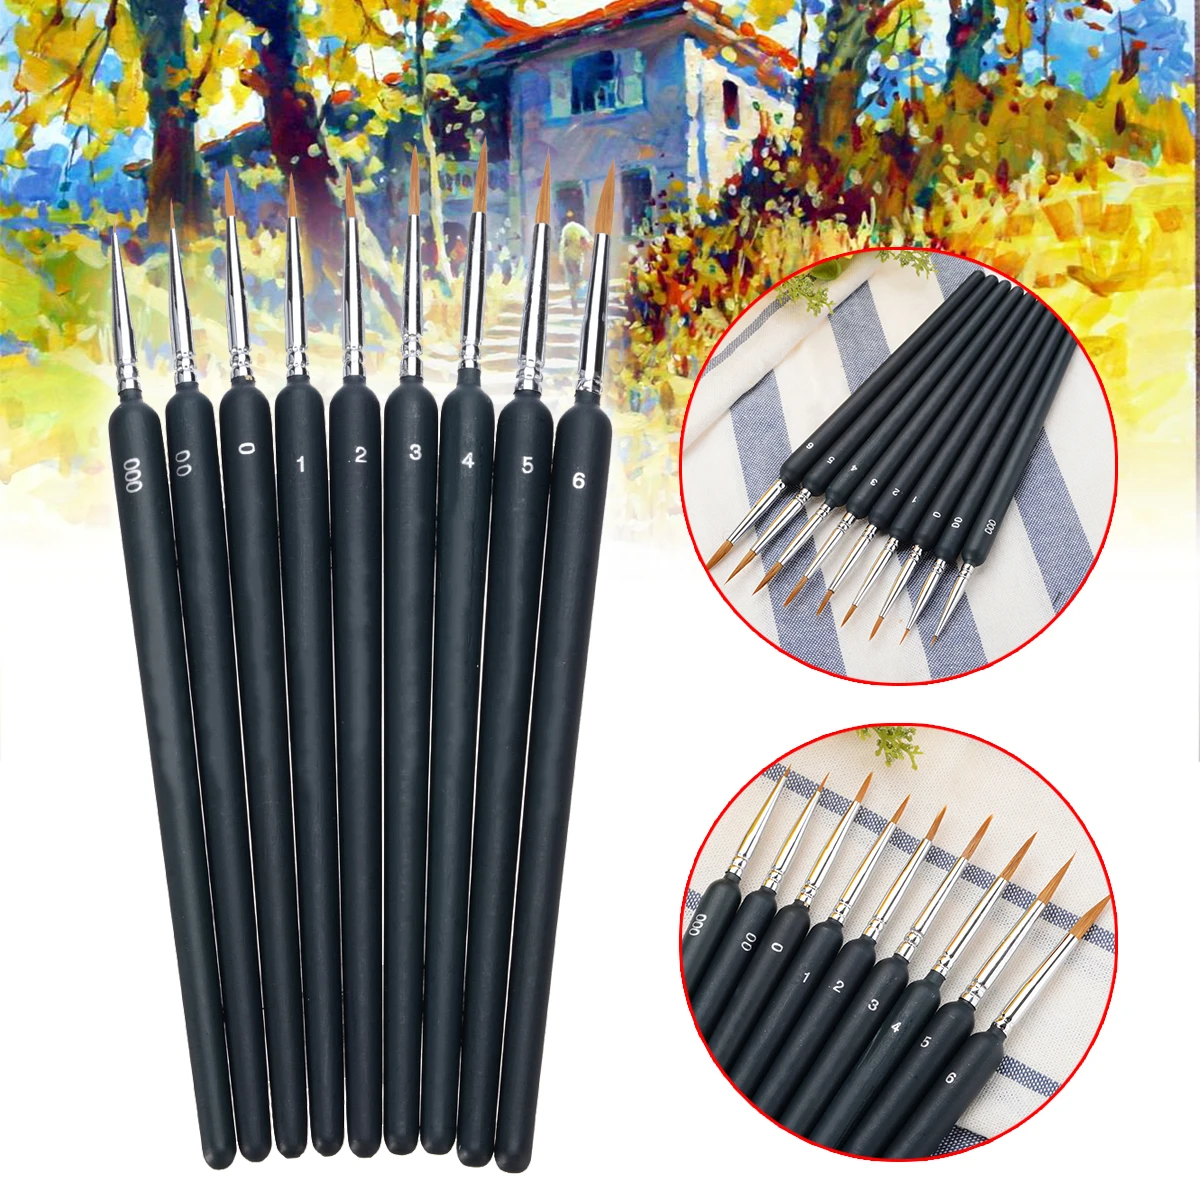 9pcs/Set Paint Brushes Artist Weasel Hair Brush Pen For Oil Painting Gouache Watercolor Paint For Beginners Drawing